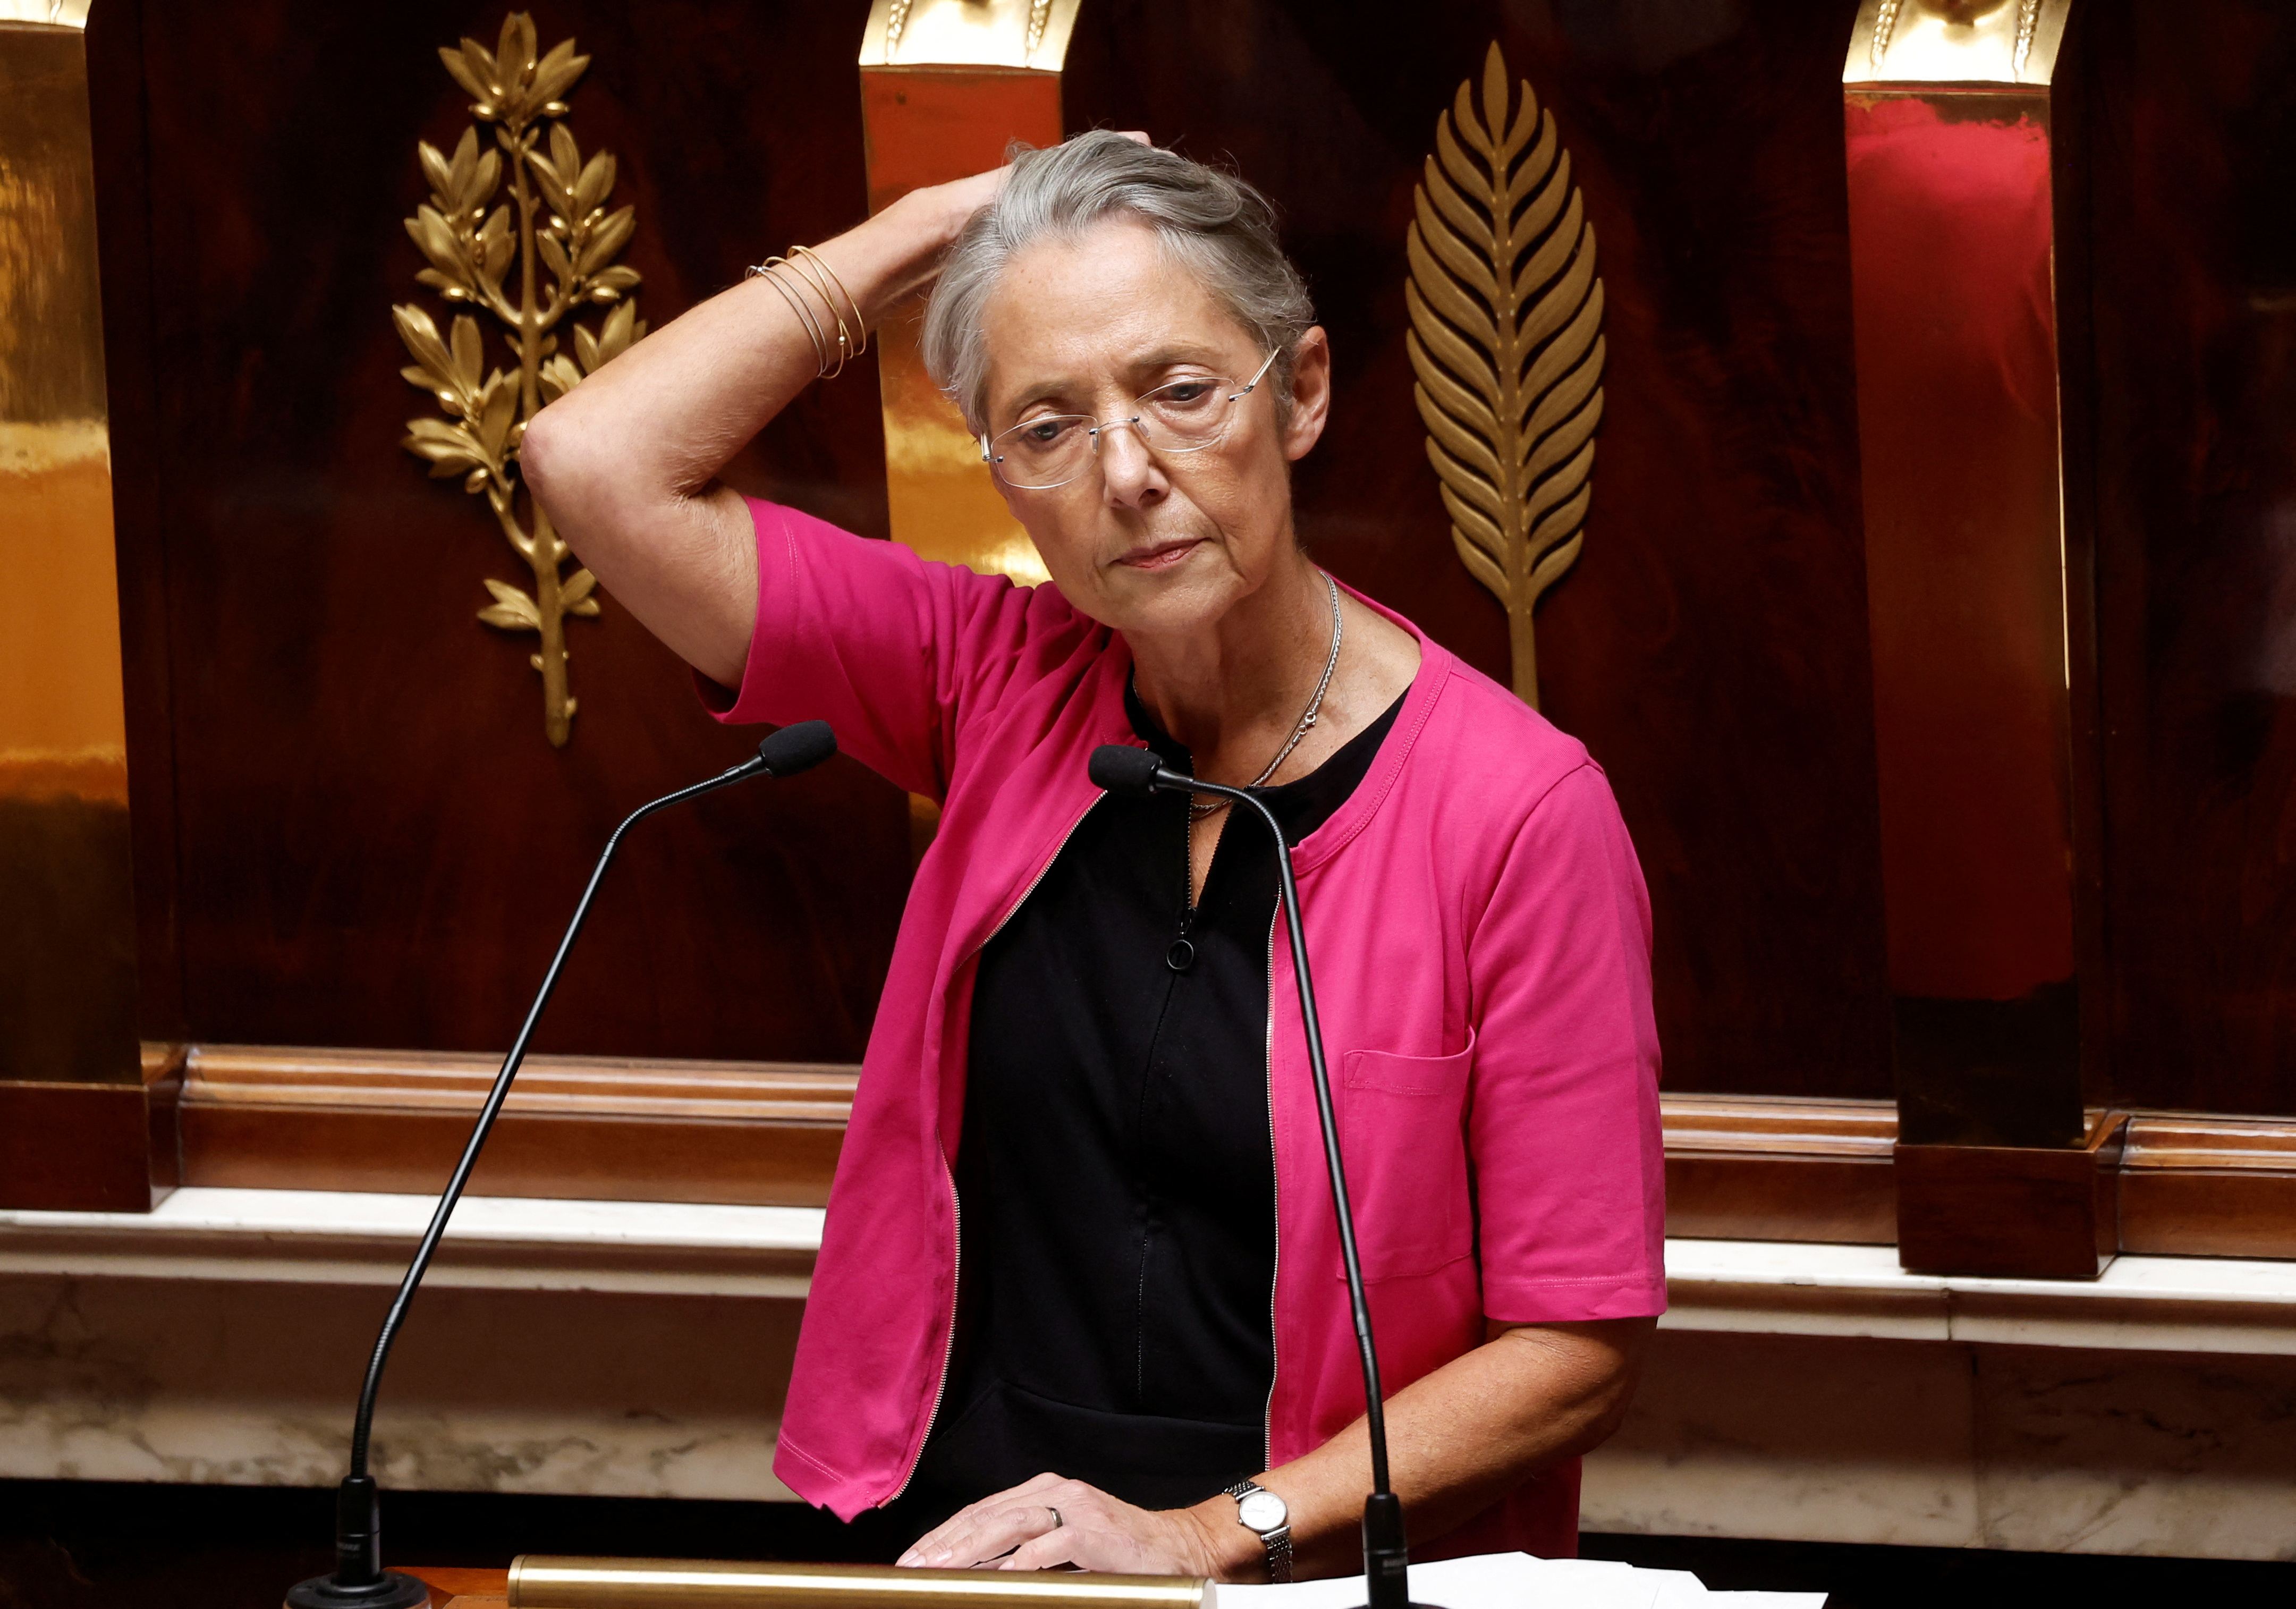 French Prime Minister Elisabeth Borne gestures as she delivers her general policy speech at the National Assembly in Paris, France, July 6, 2022. REUTERS/Benoit Tessier